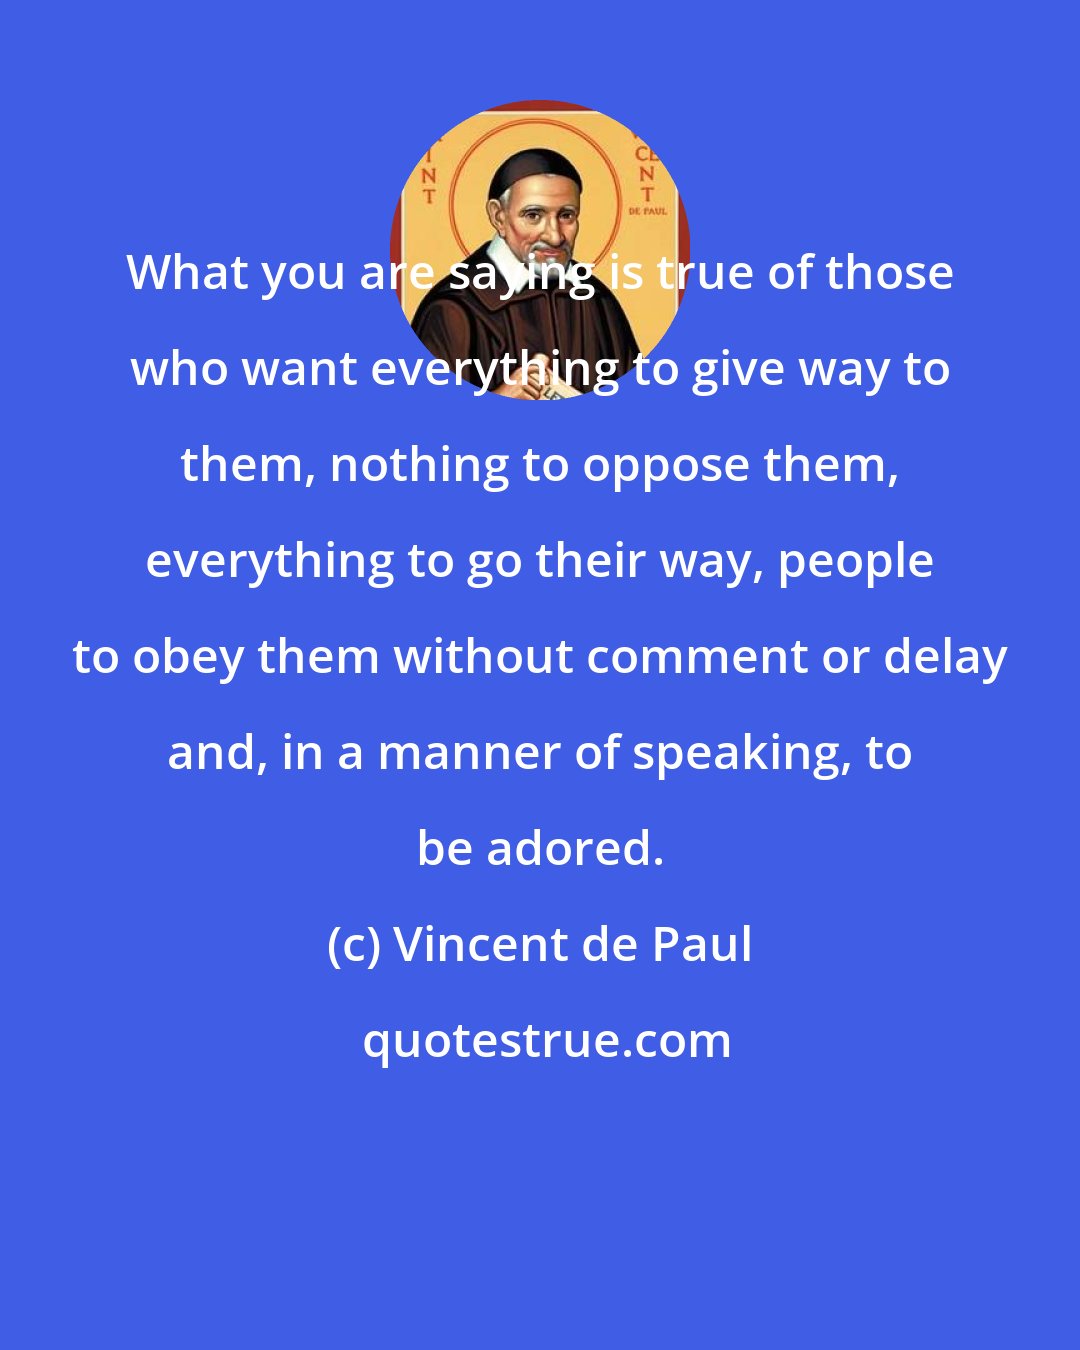 Vincent de Paul: What you are saying is true of those who want everything to give way to them, nothing to oppose them, everything to go their way, people to obey them without comment or delay and, in a manner of speaking, to be adored.